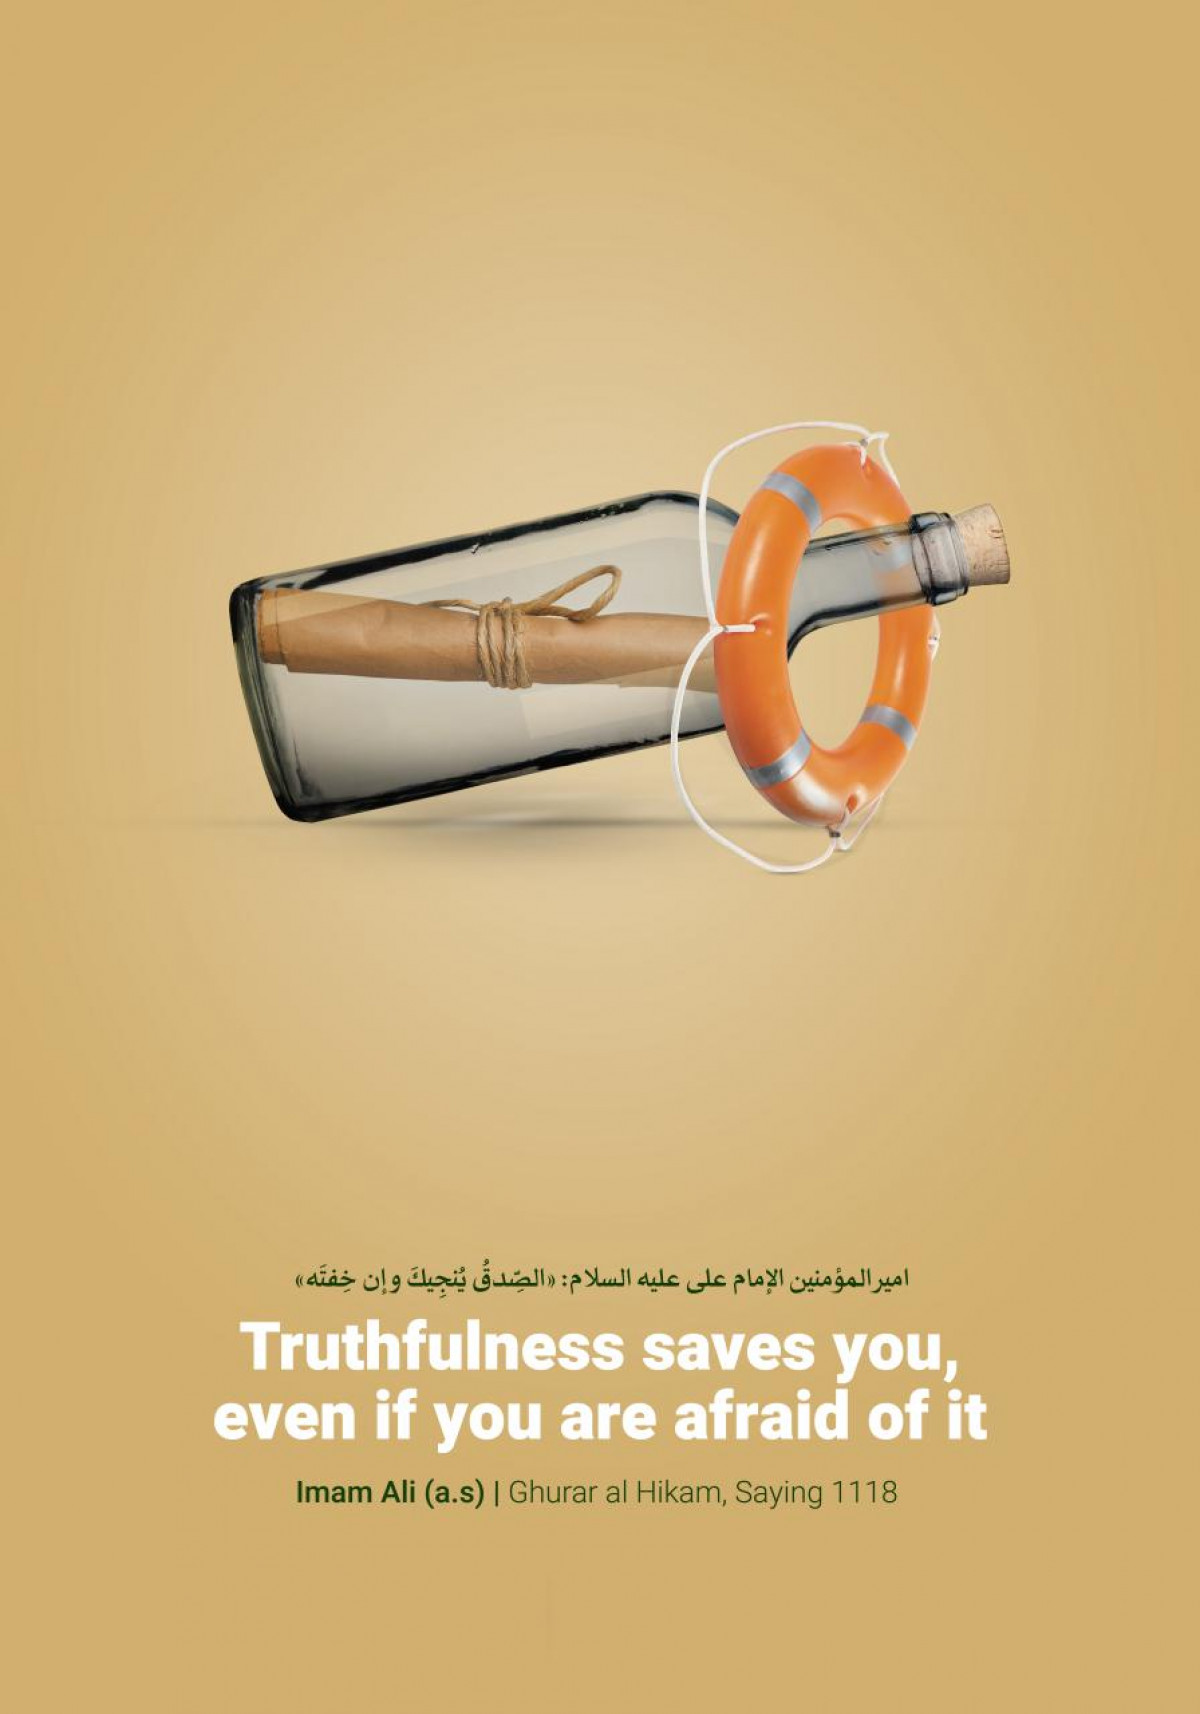 Truthfulness saves you, even if you are afraid of it